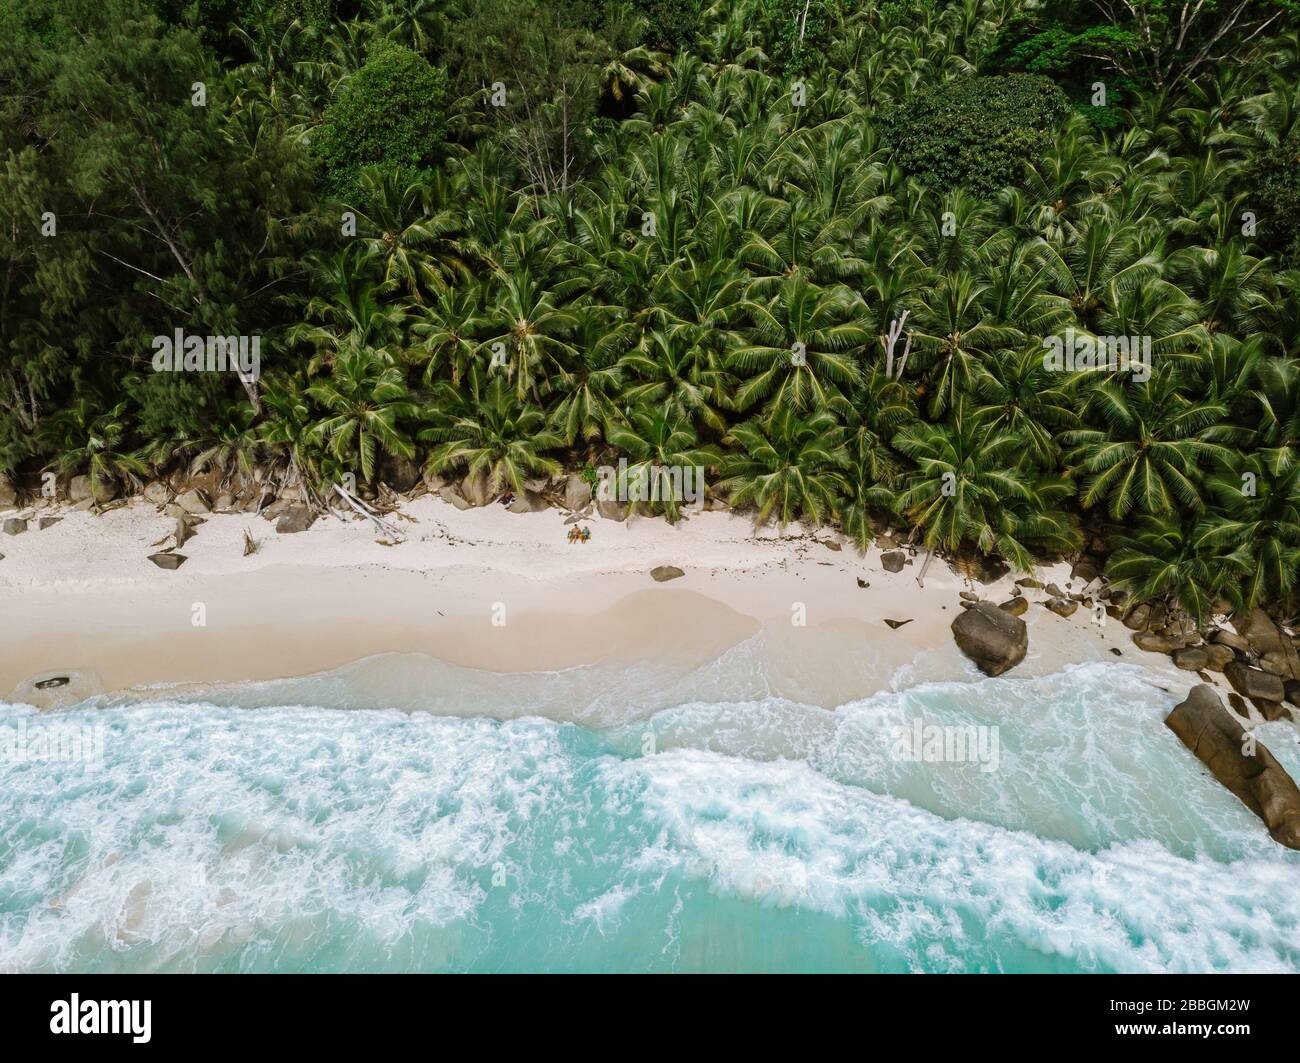 Seychelles Tropical Island Praslin with white beach and tropical palm trees, Drone aerial view over Seychelles Stock Photo